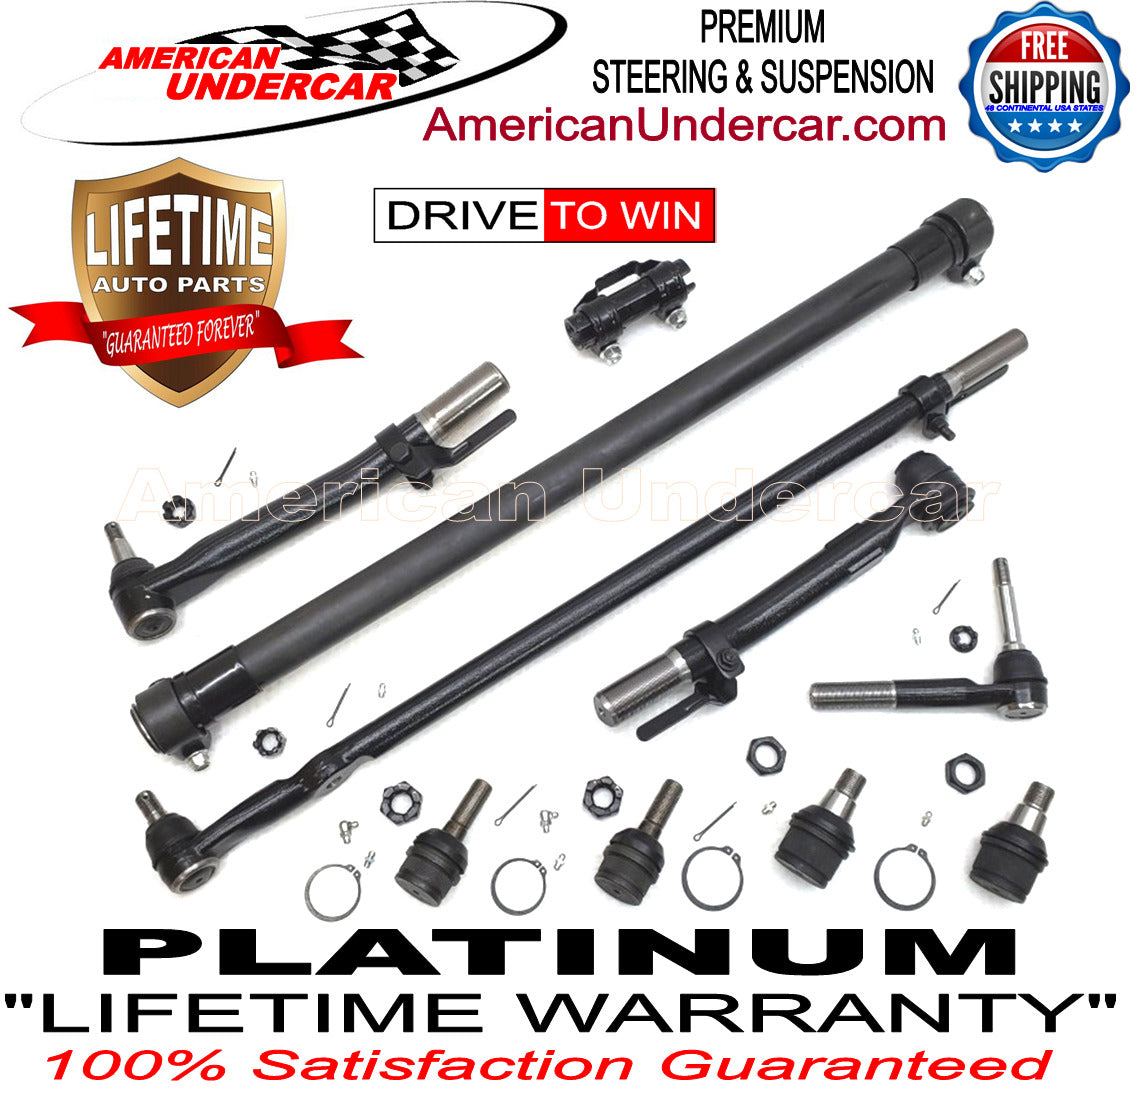 Lifetime Ball Joint Steering Suspension Kit for 2005-2010 Ford F550 Super Duty 2WD